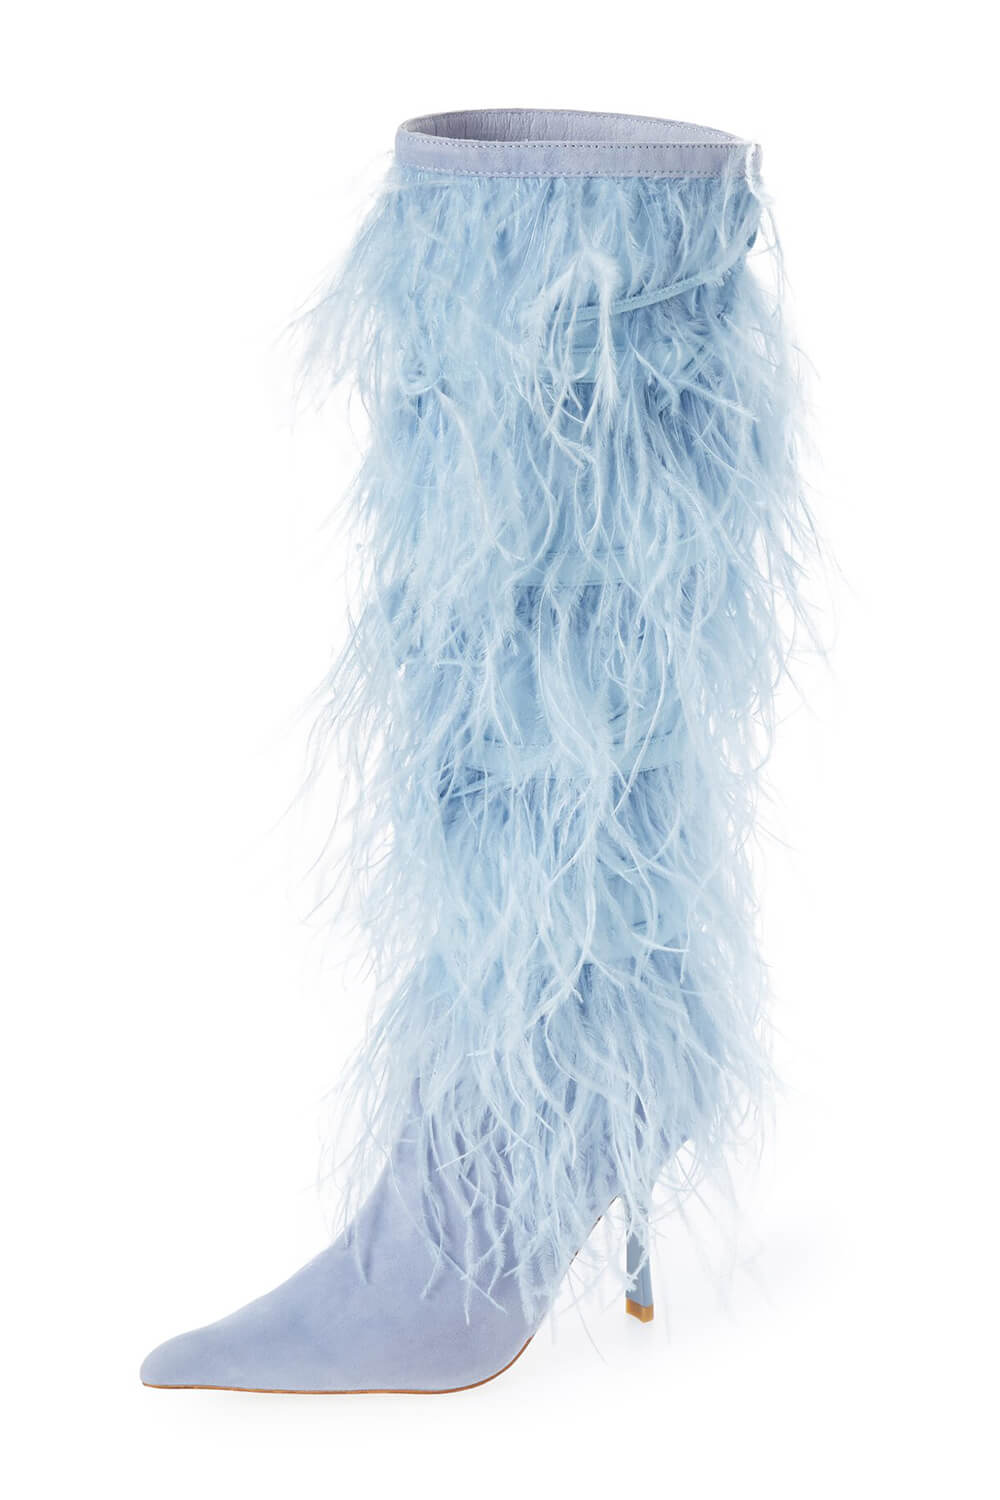 Saint Feather Layered Pointed Toe Knee High Stiletto Boots - Light Blue